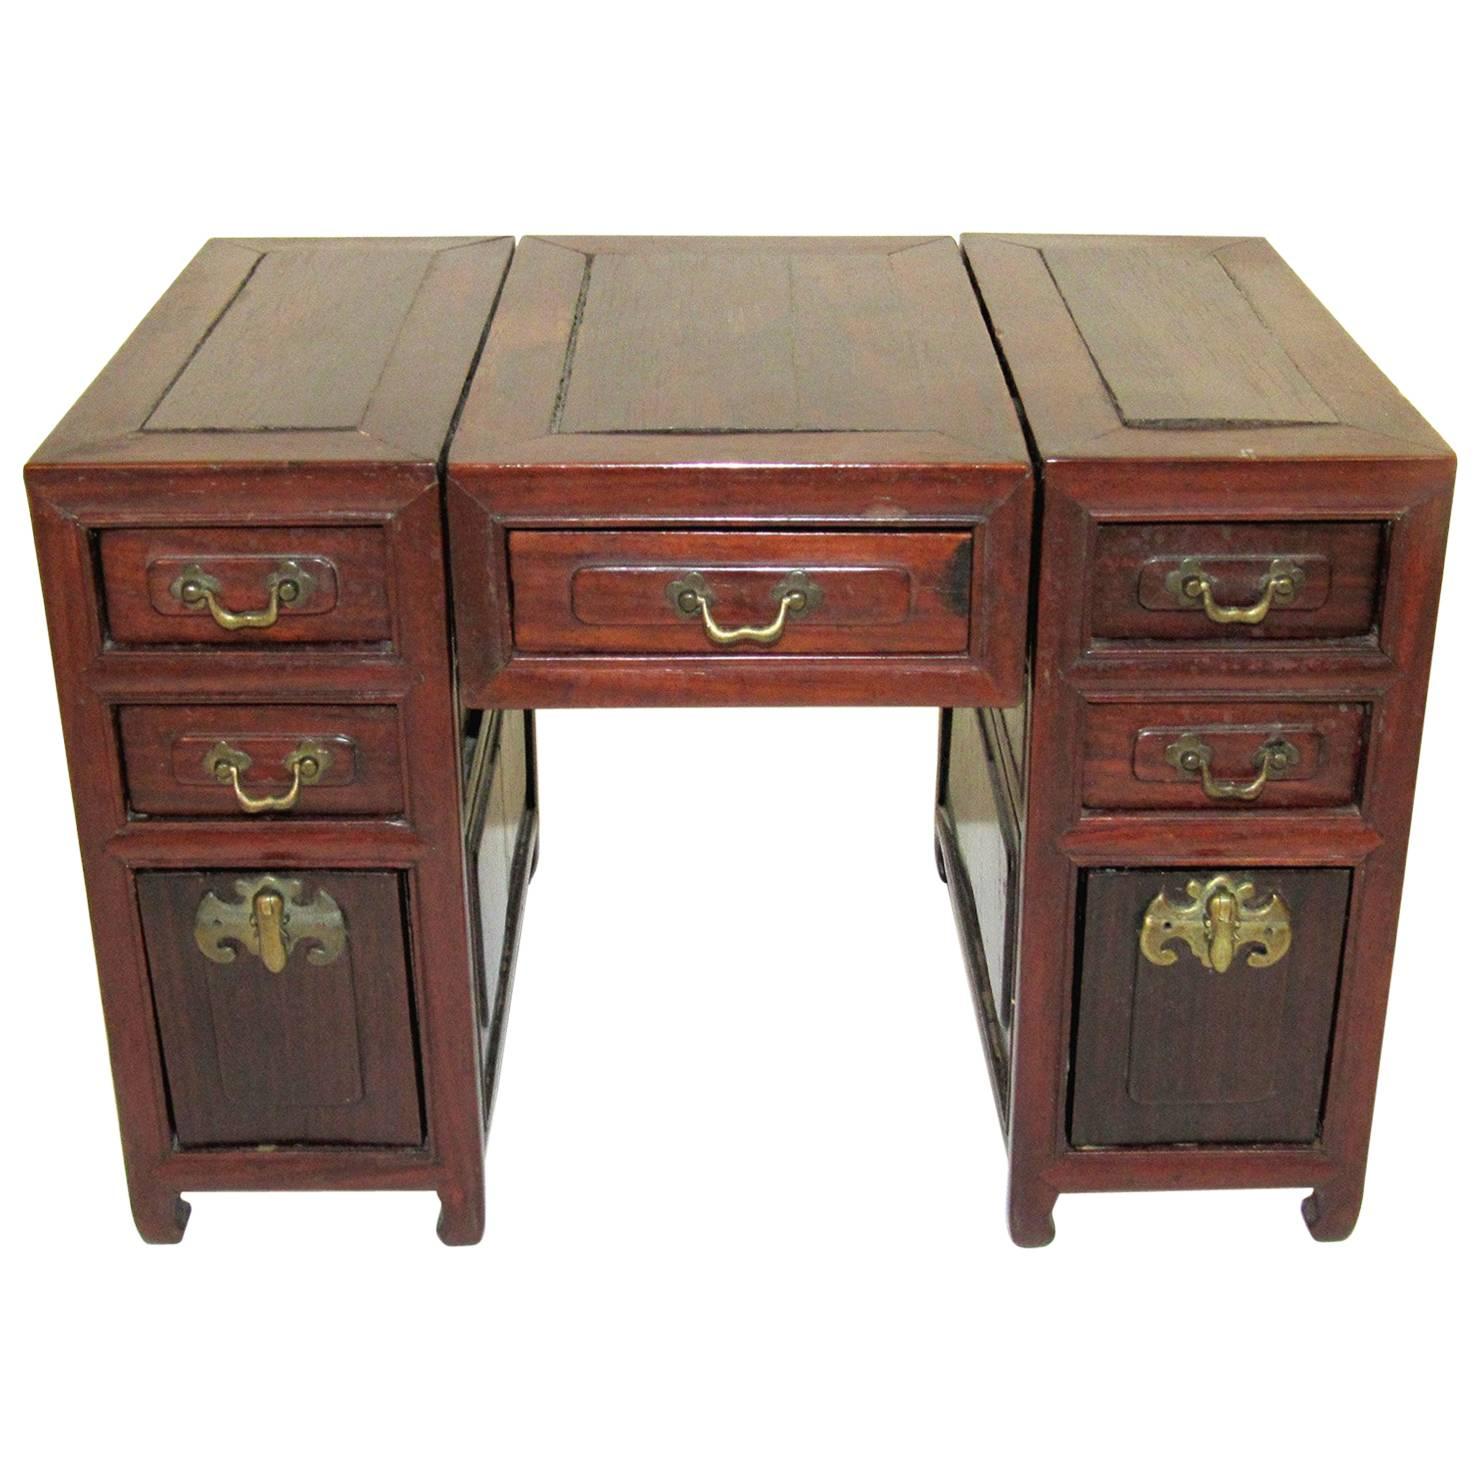 Early 19th Century Chinese Miniature Desk